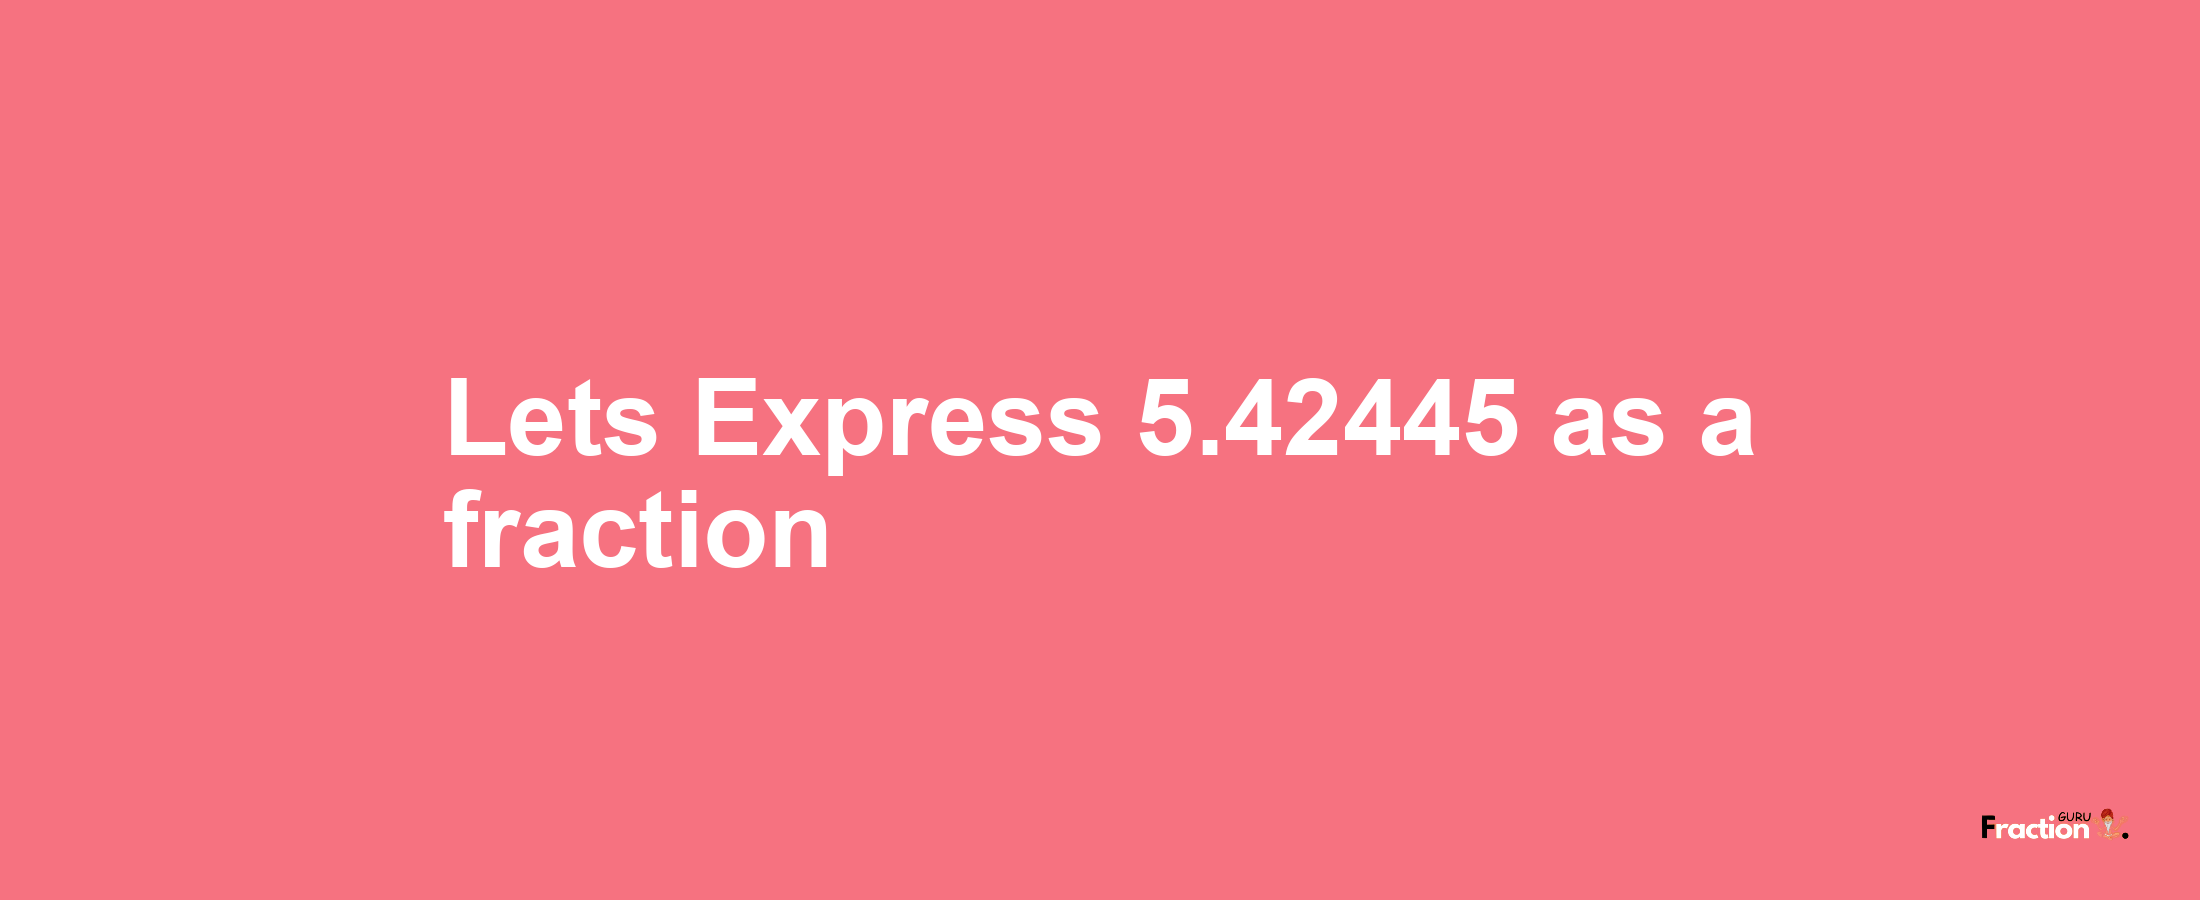 Lets Express 5.42445 as afraction